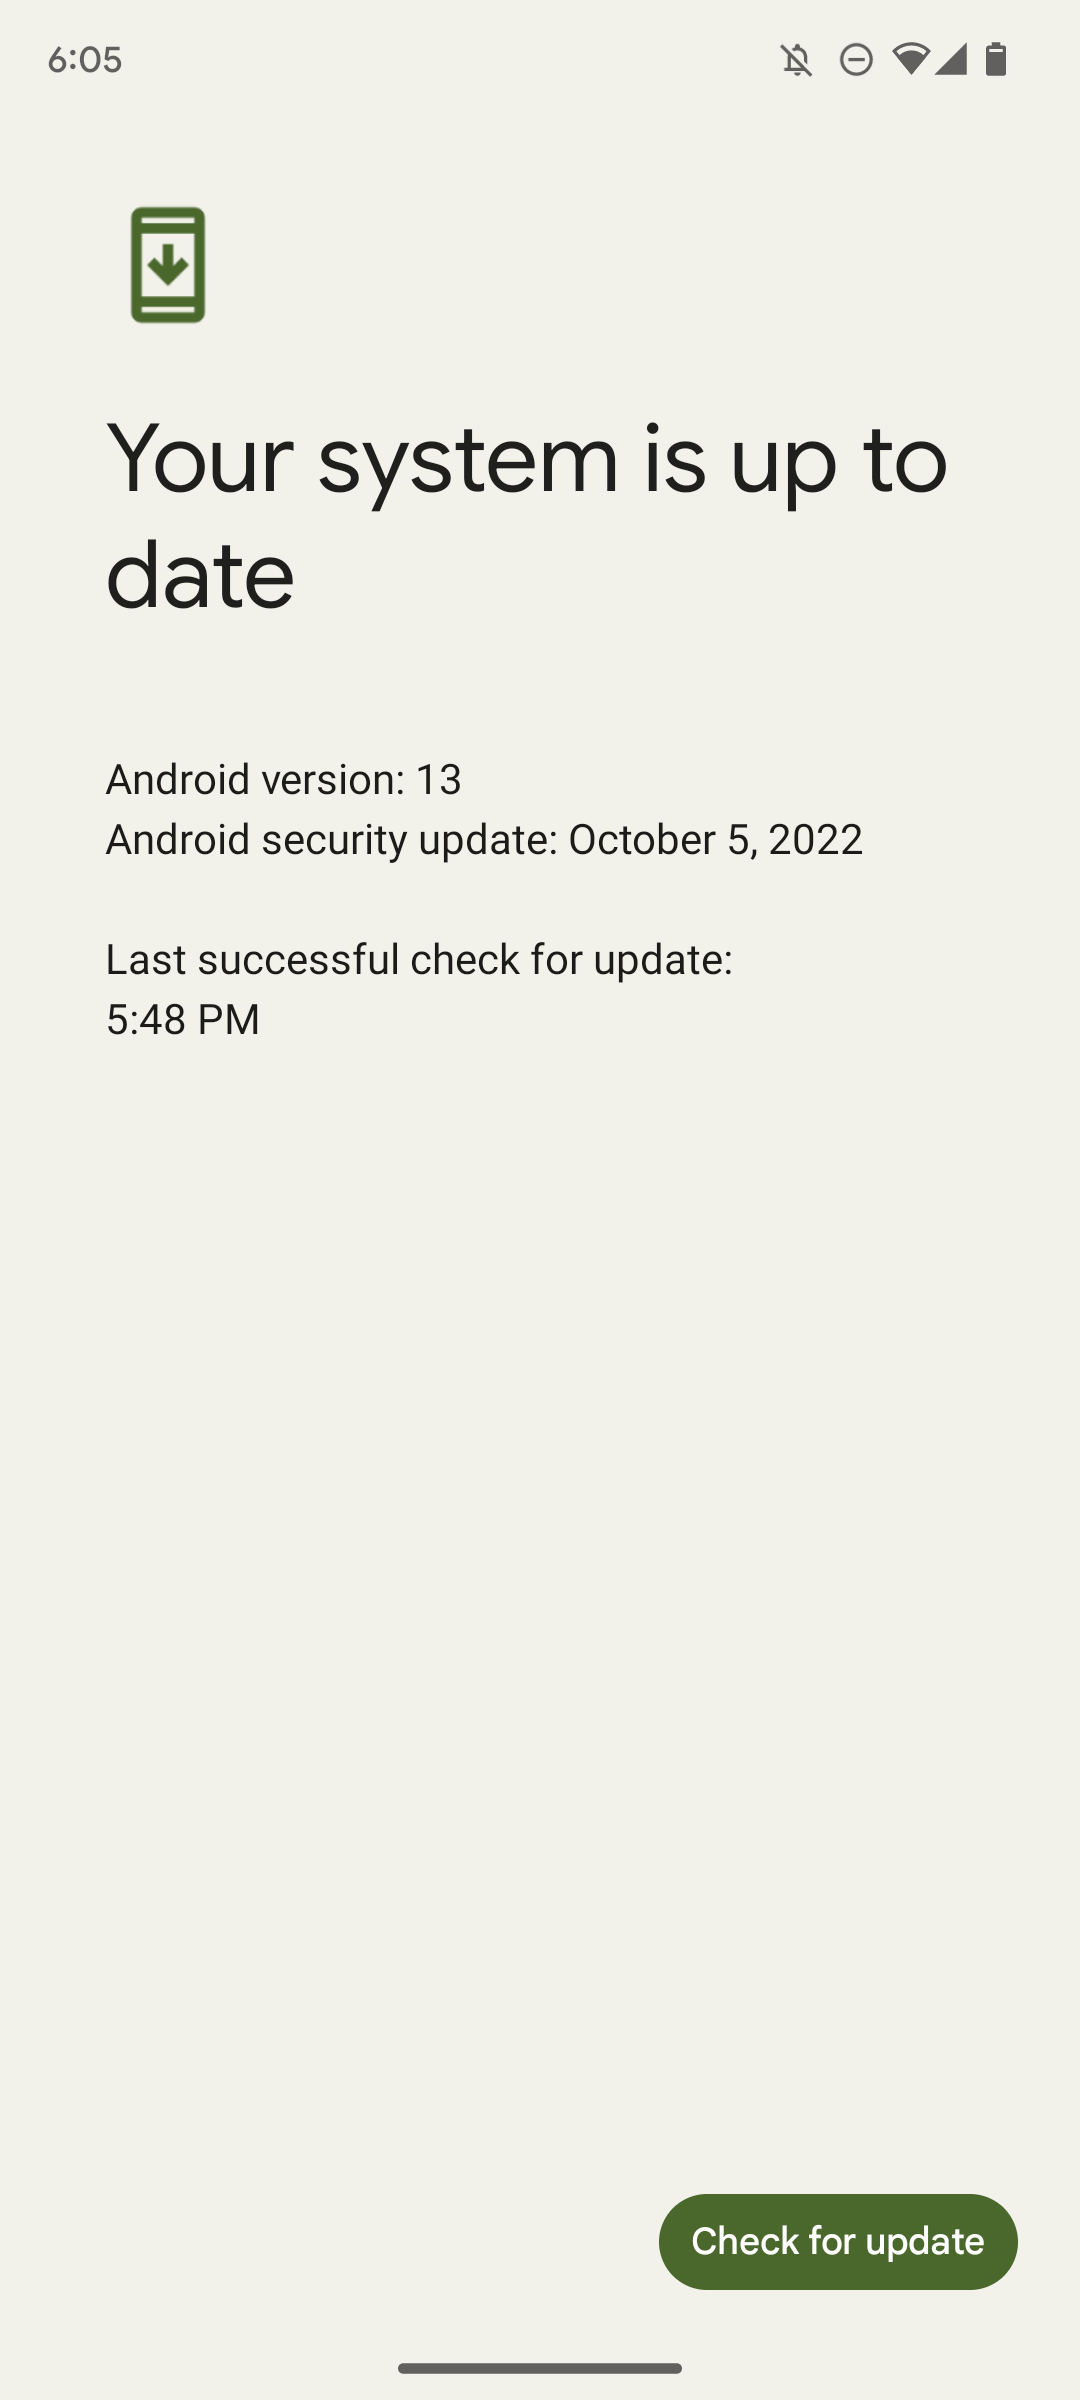 Screenshot of Google Pixel 7's system update screen, showing that it is up to date